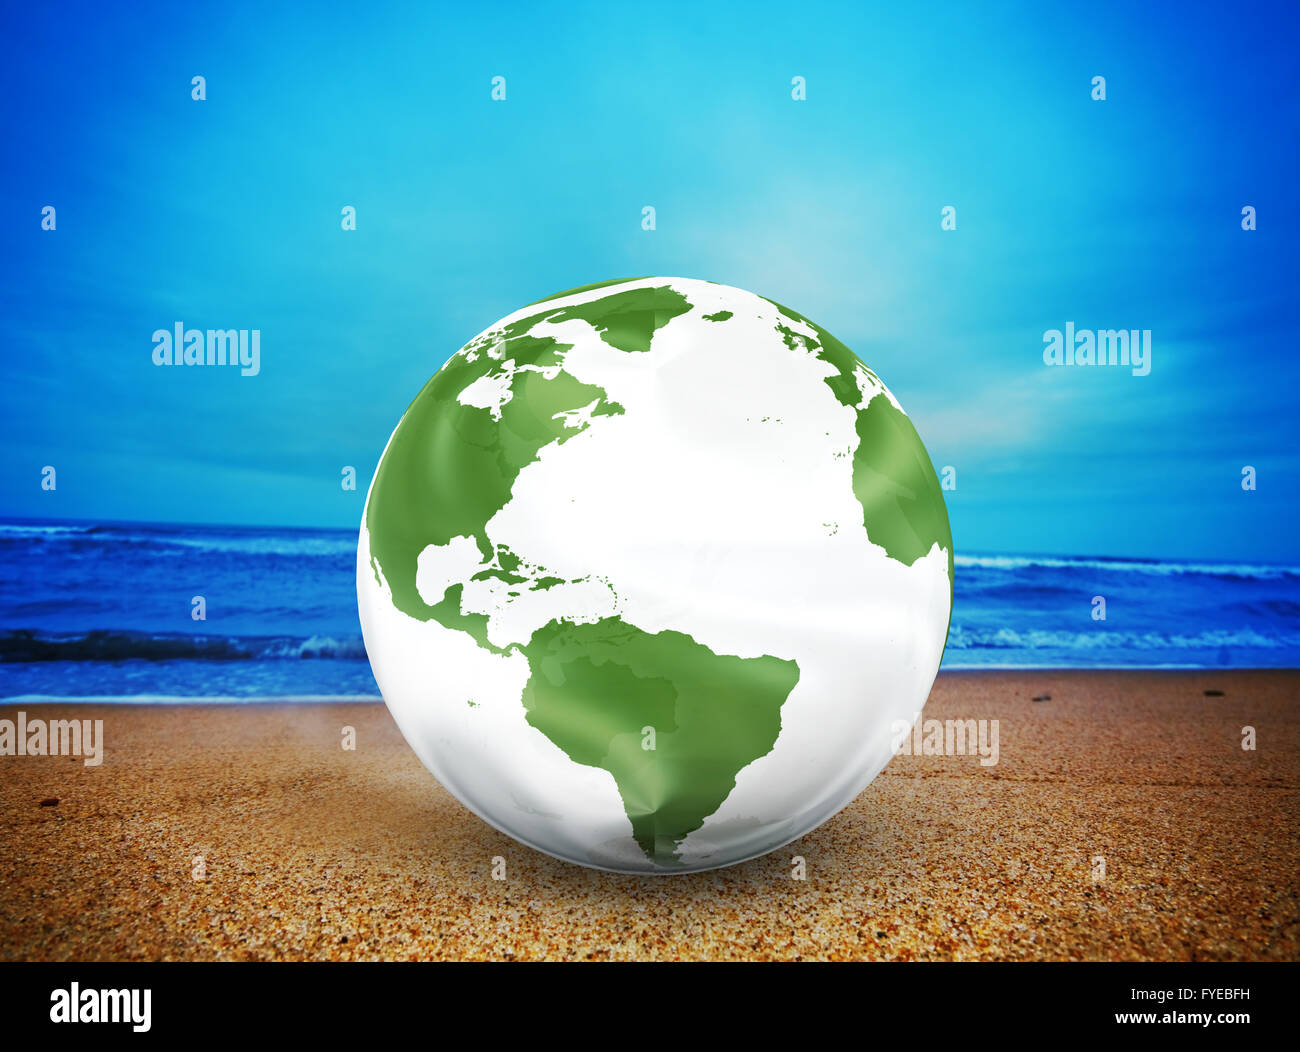 Planet earth model on the beach Stock Photo